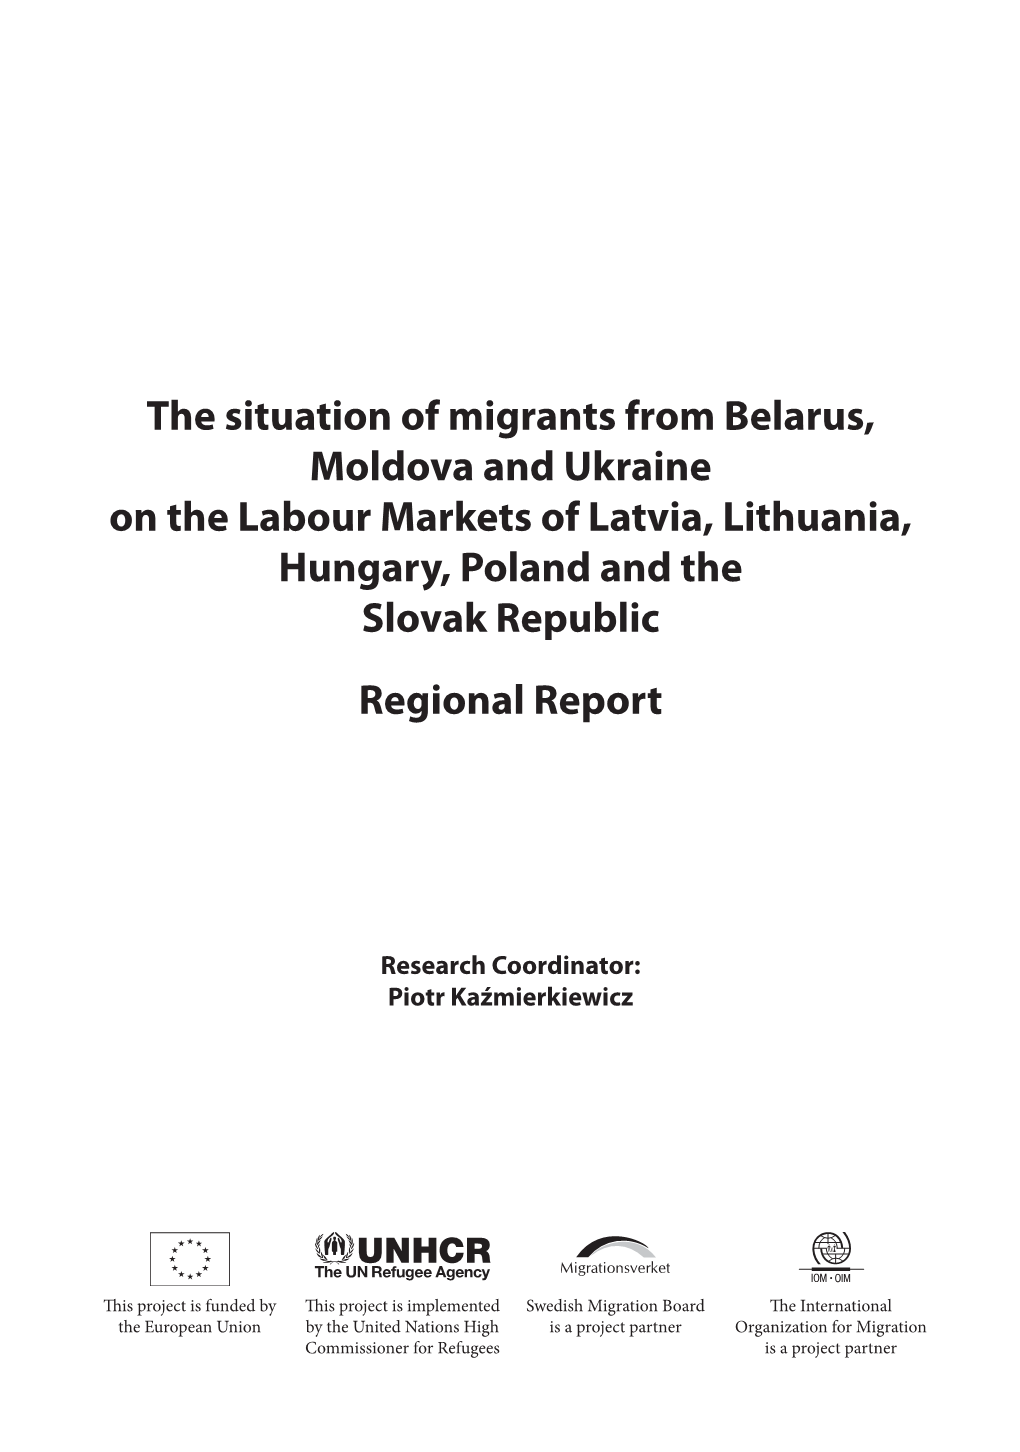 The Situation of Migrants from Belarus, Moldova and Ukraine on the Labour Markets of Latvia, Lithuania, Hungary, Poland and the Slovak Republic Regional Report